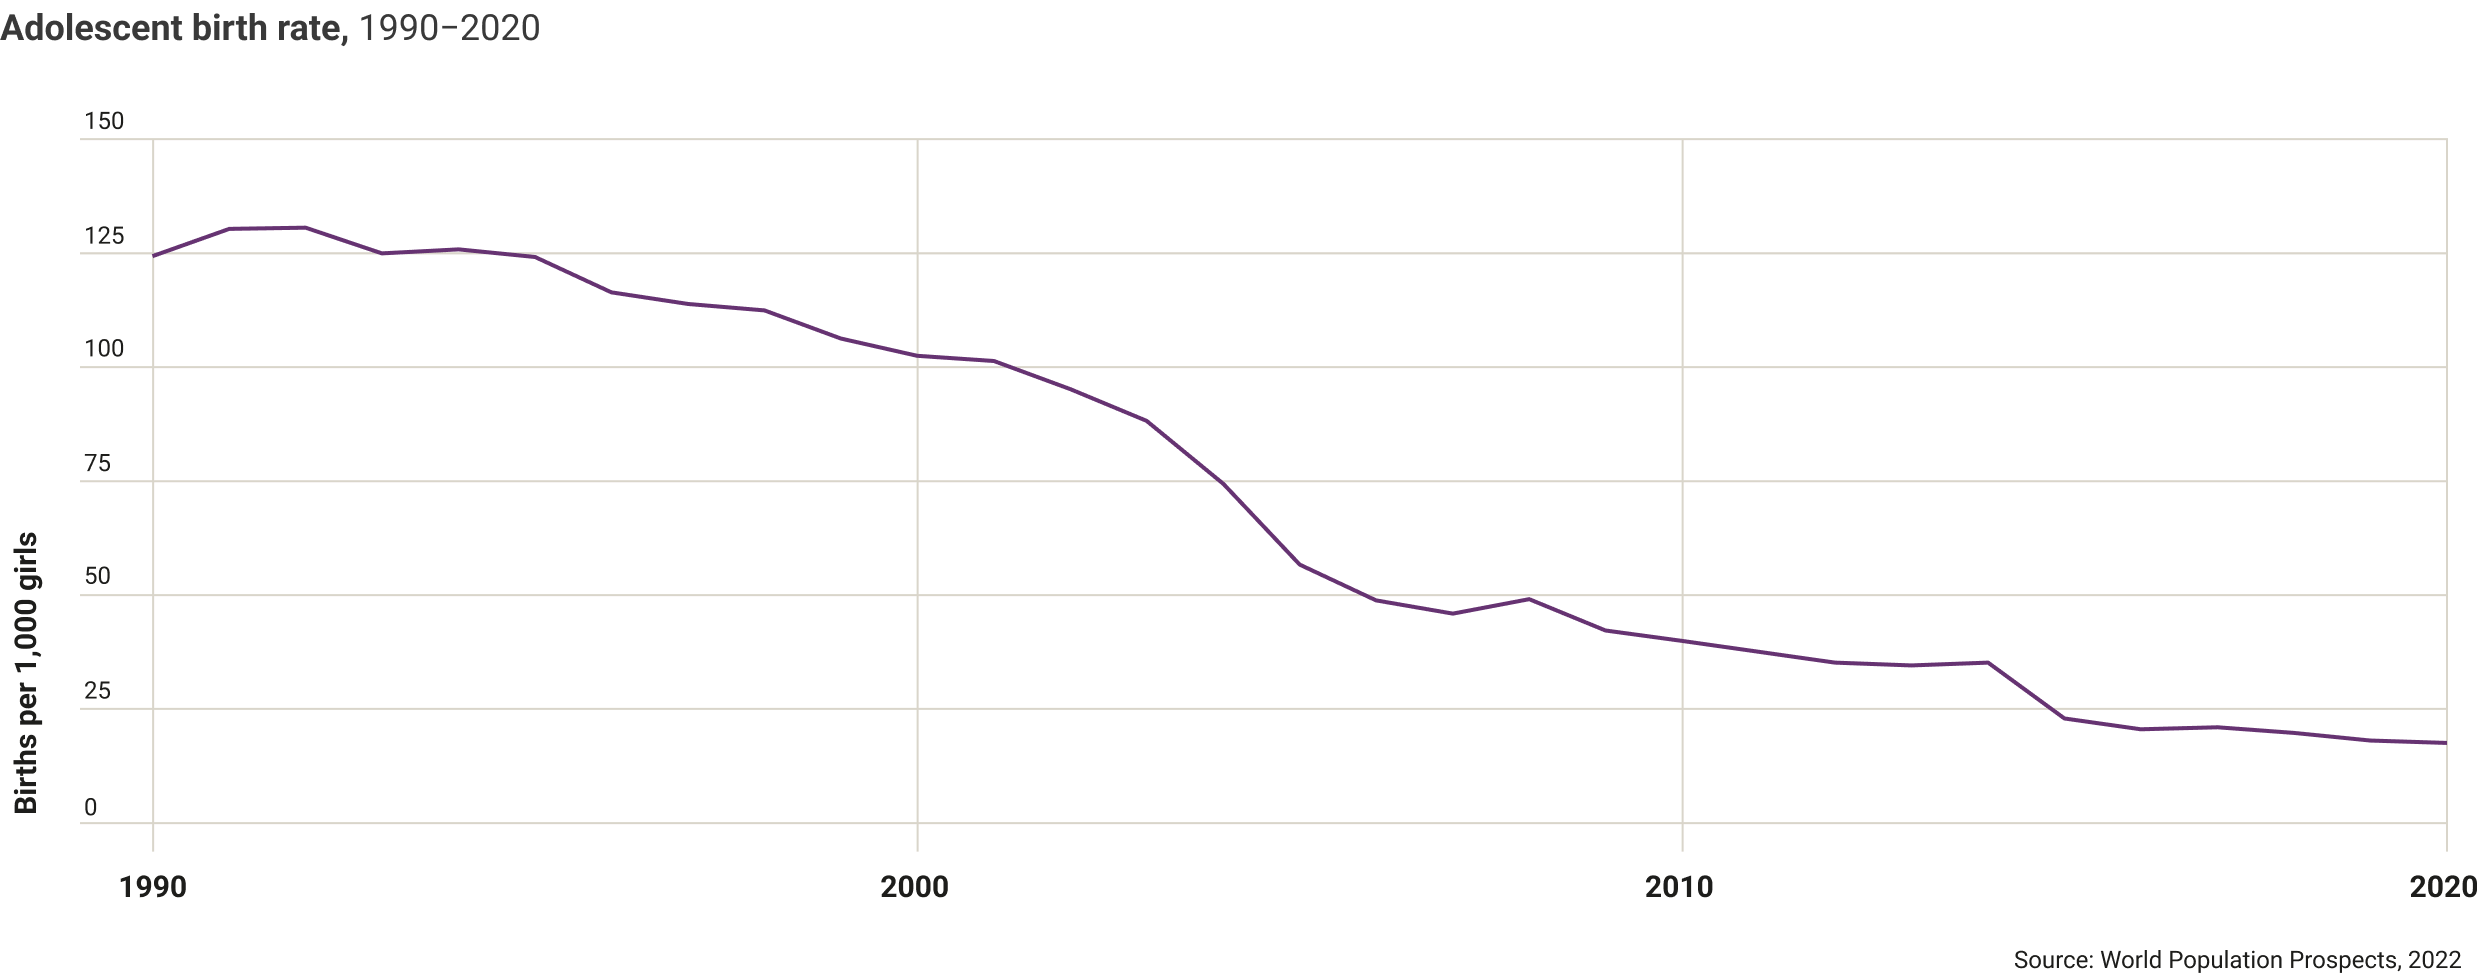 india-adolescence-birth-rate.png